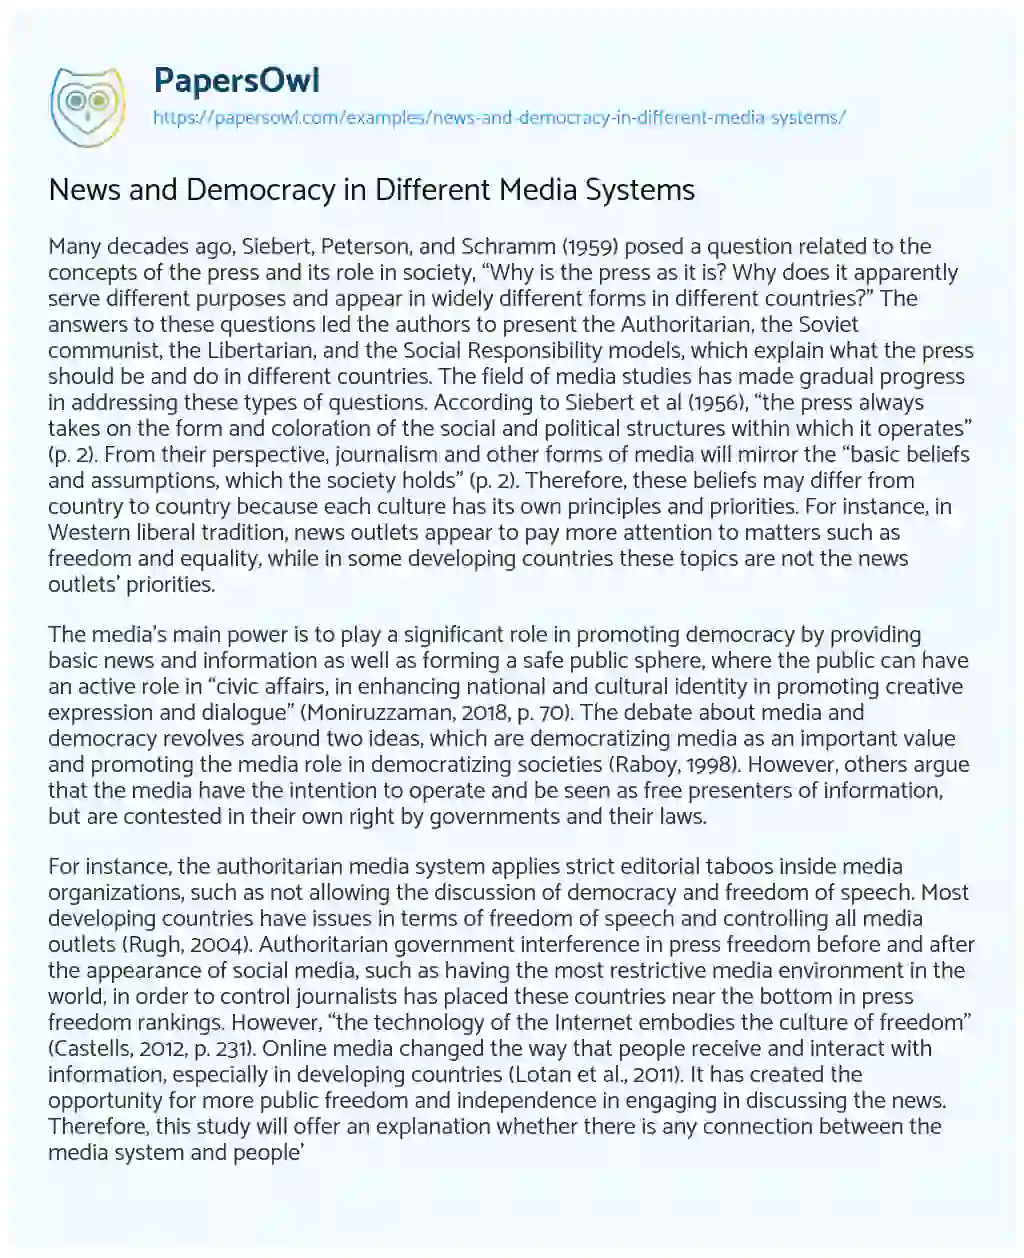 Essay on News and Democracy in Different Media Systems